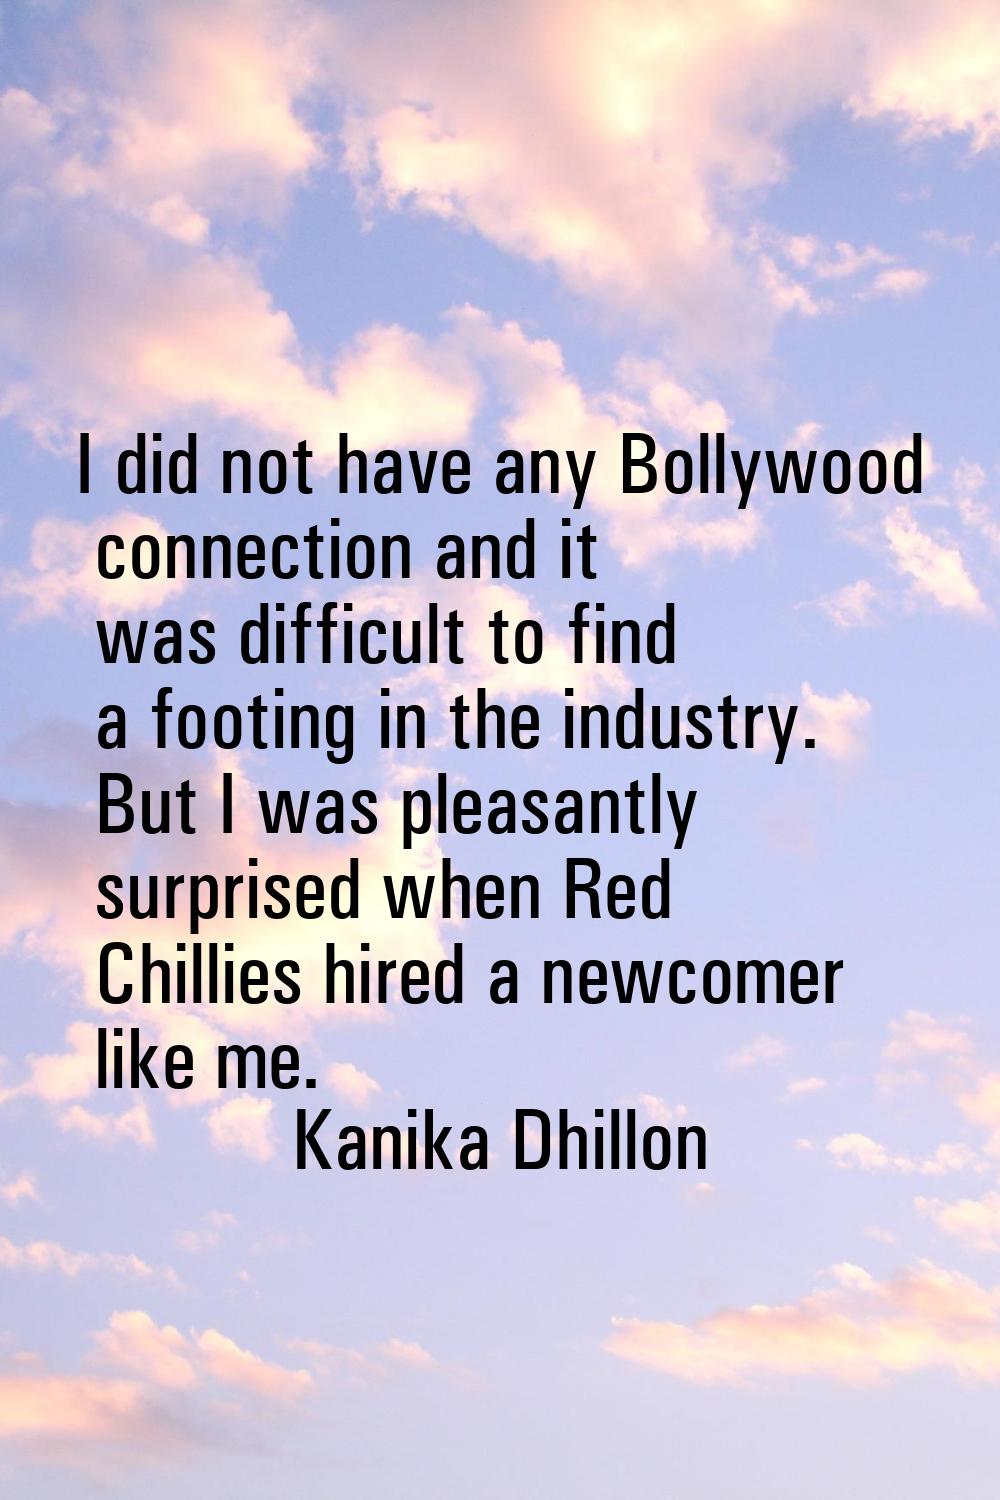 I did not have any Bollywood connection and it was difficult to find a footing in the industry. But